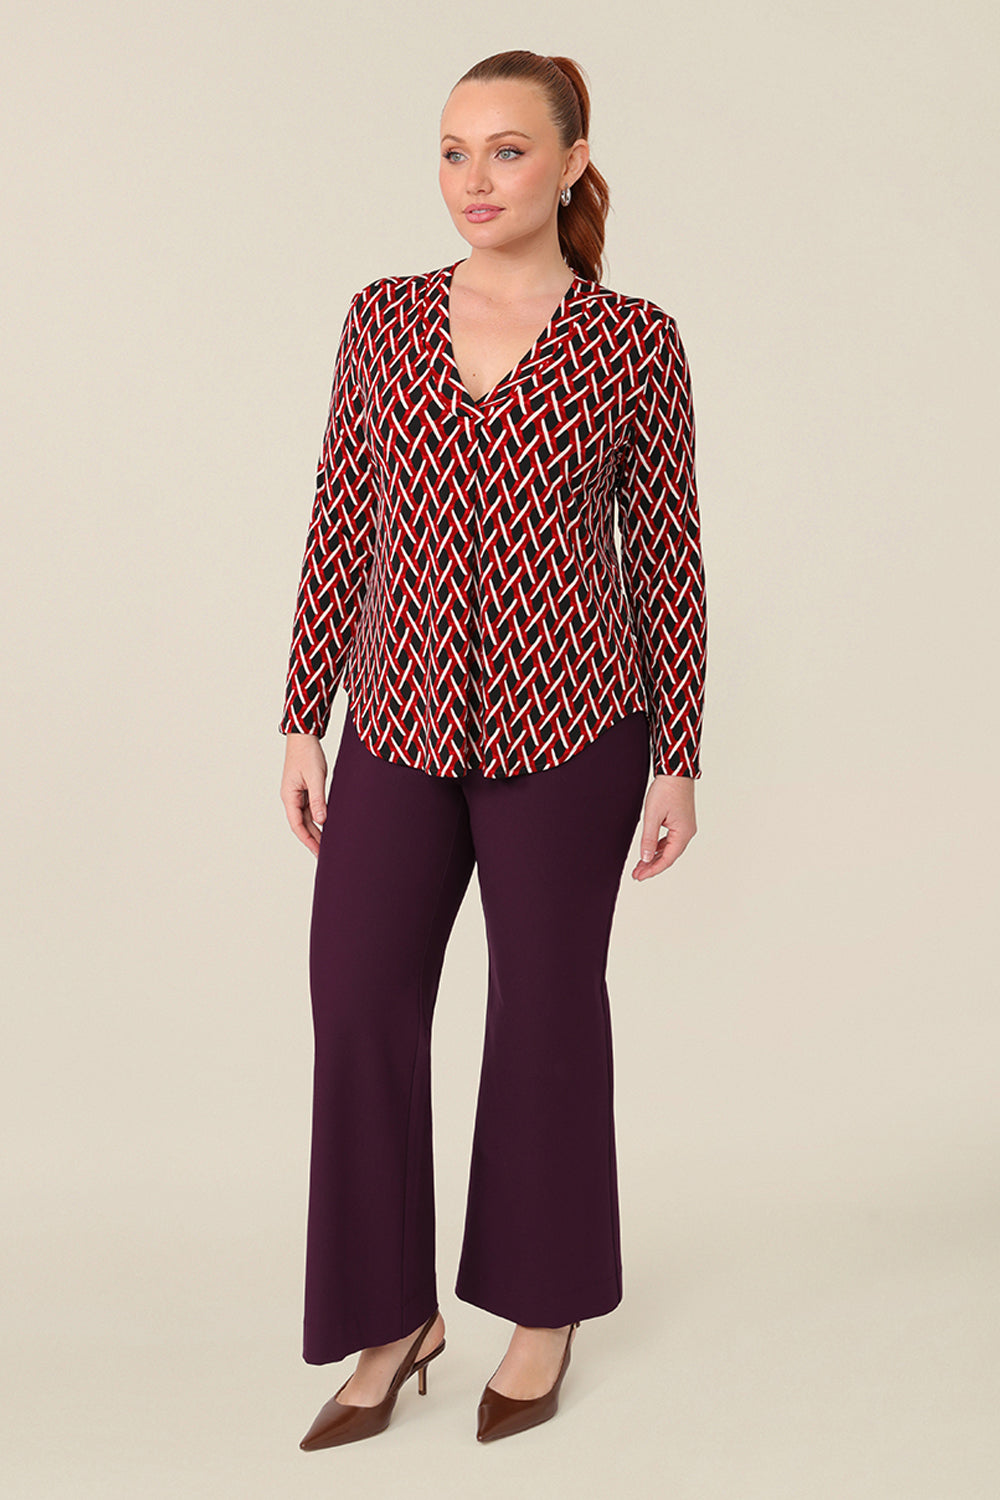 A long sleeve, women's work top, this red, white and black chevron print V-neck top has a shirttail hem. Worn by a curvy woman, this workwear top is worn with mulberry red, flared leg tailored work pants. Shop this office outfit at Australian fashion brand, L&F in petite to plus sizes.